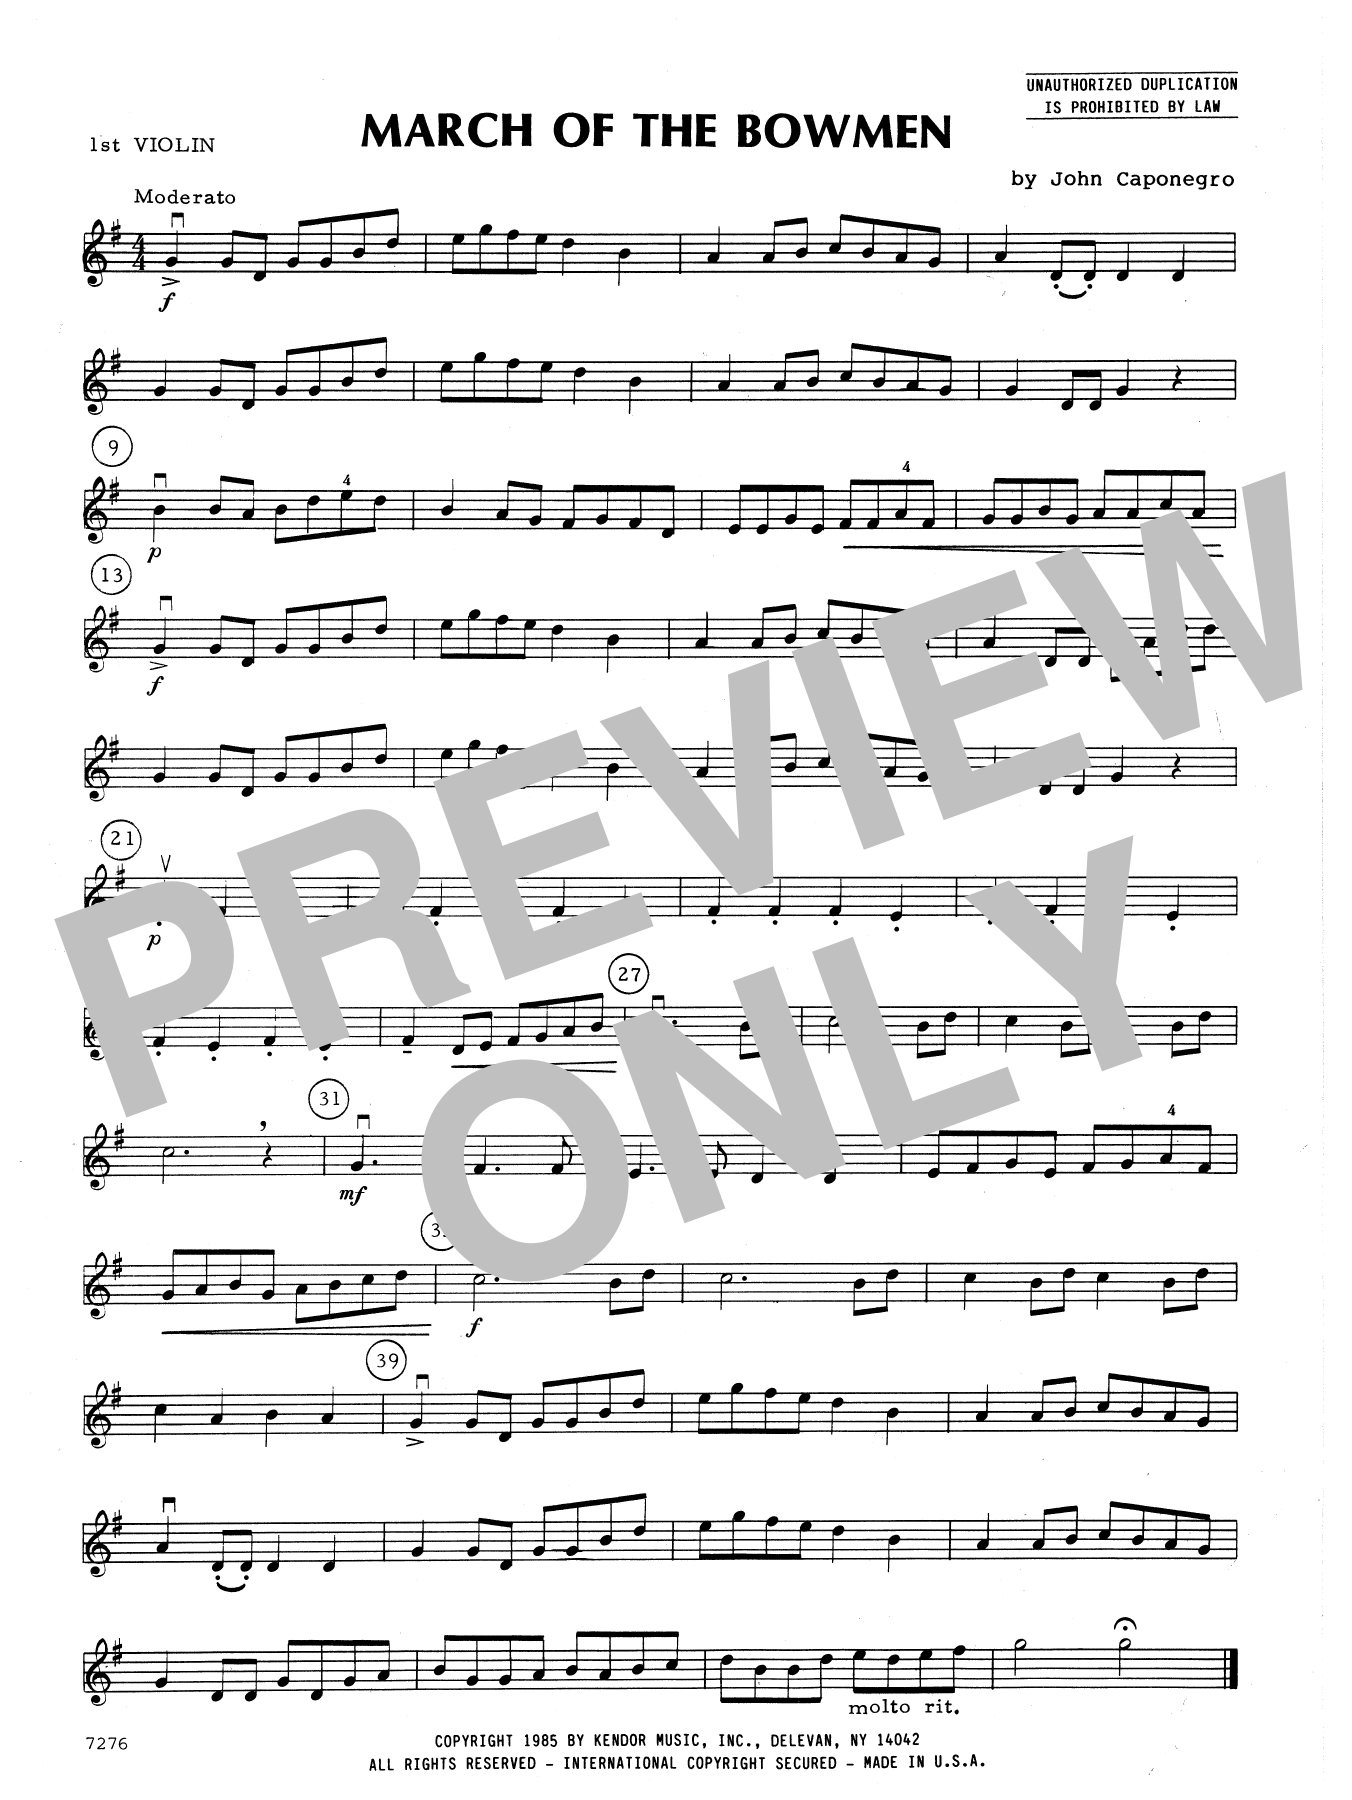 Download John Caponegro March Of The Bowmen - 1st Violin Sheet Music